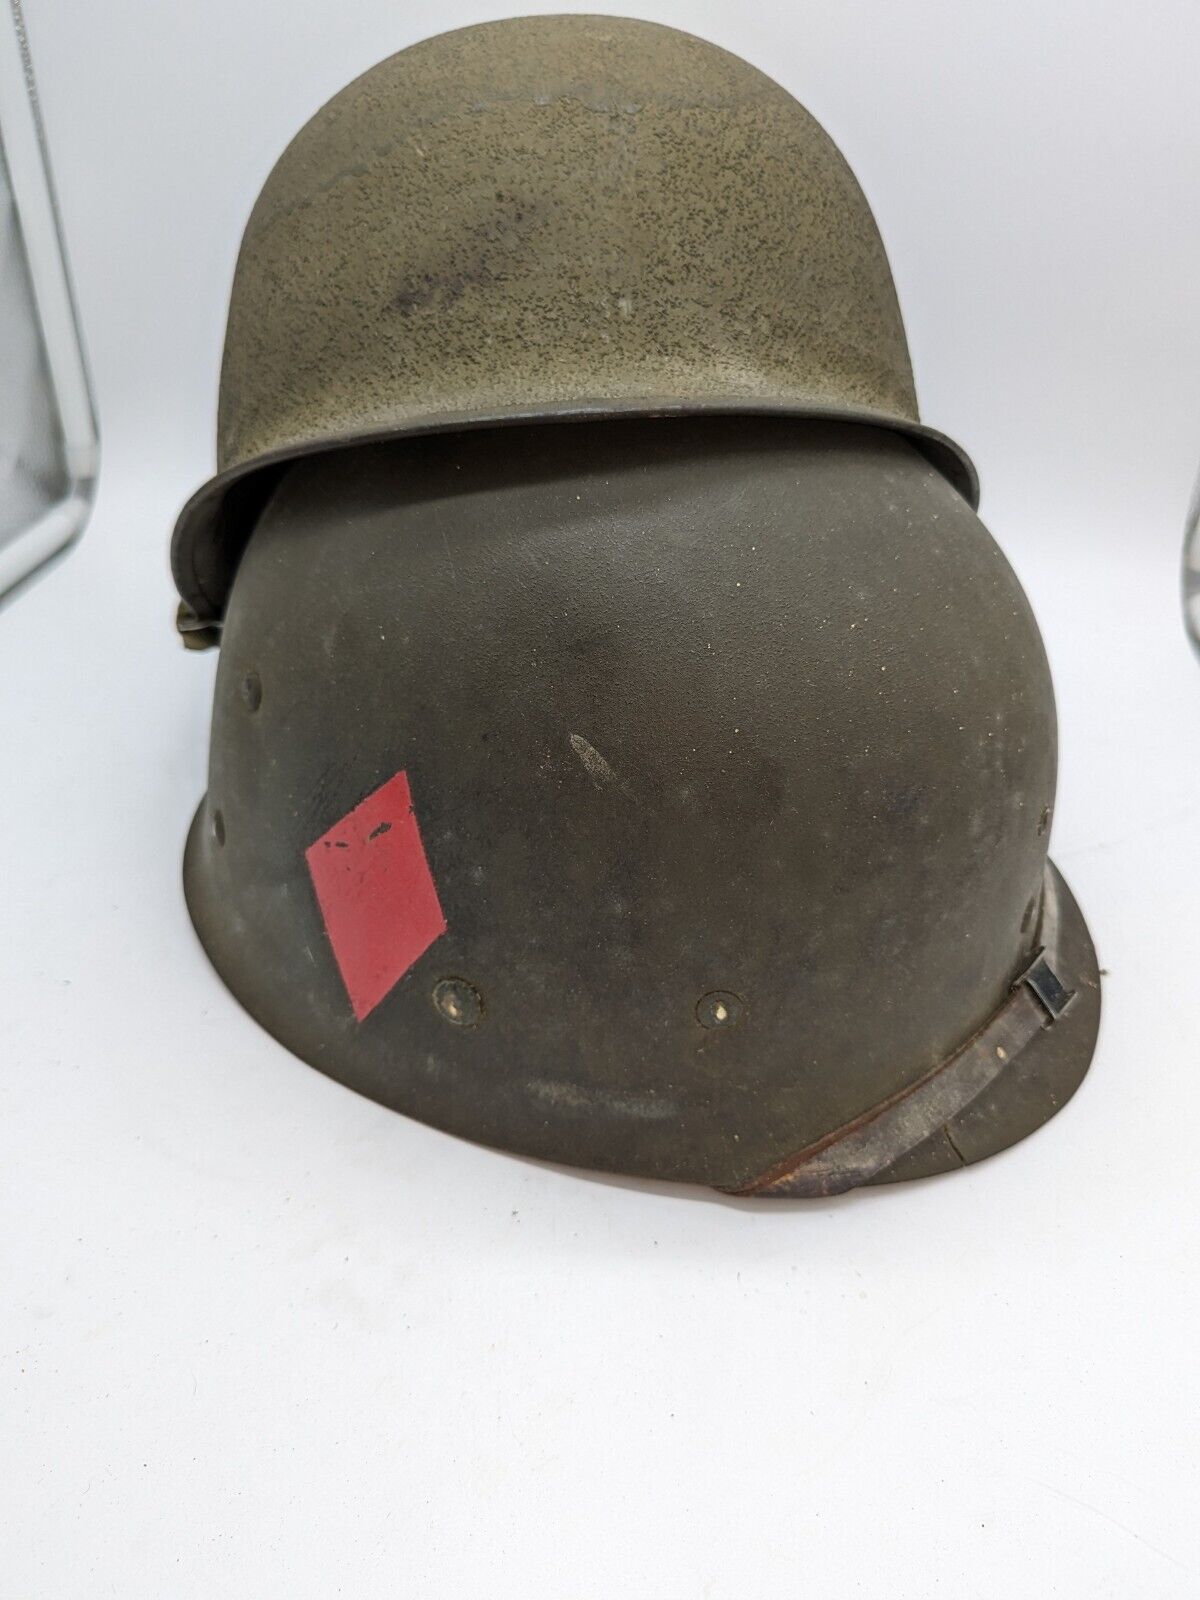 5th Infantry Division WW2 M1 Helmet & liner with Insignia